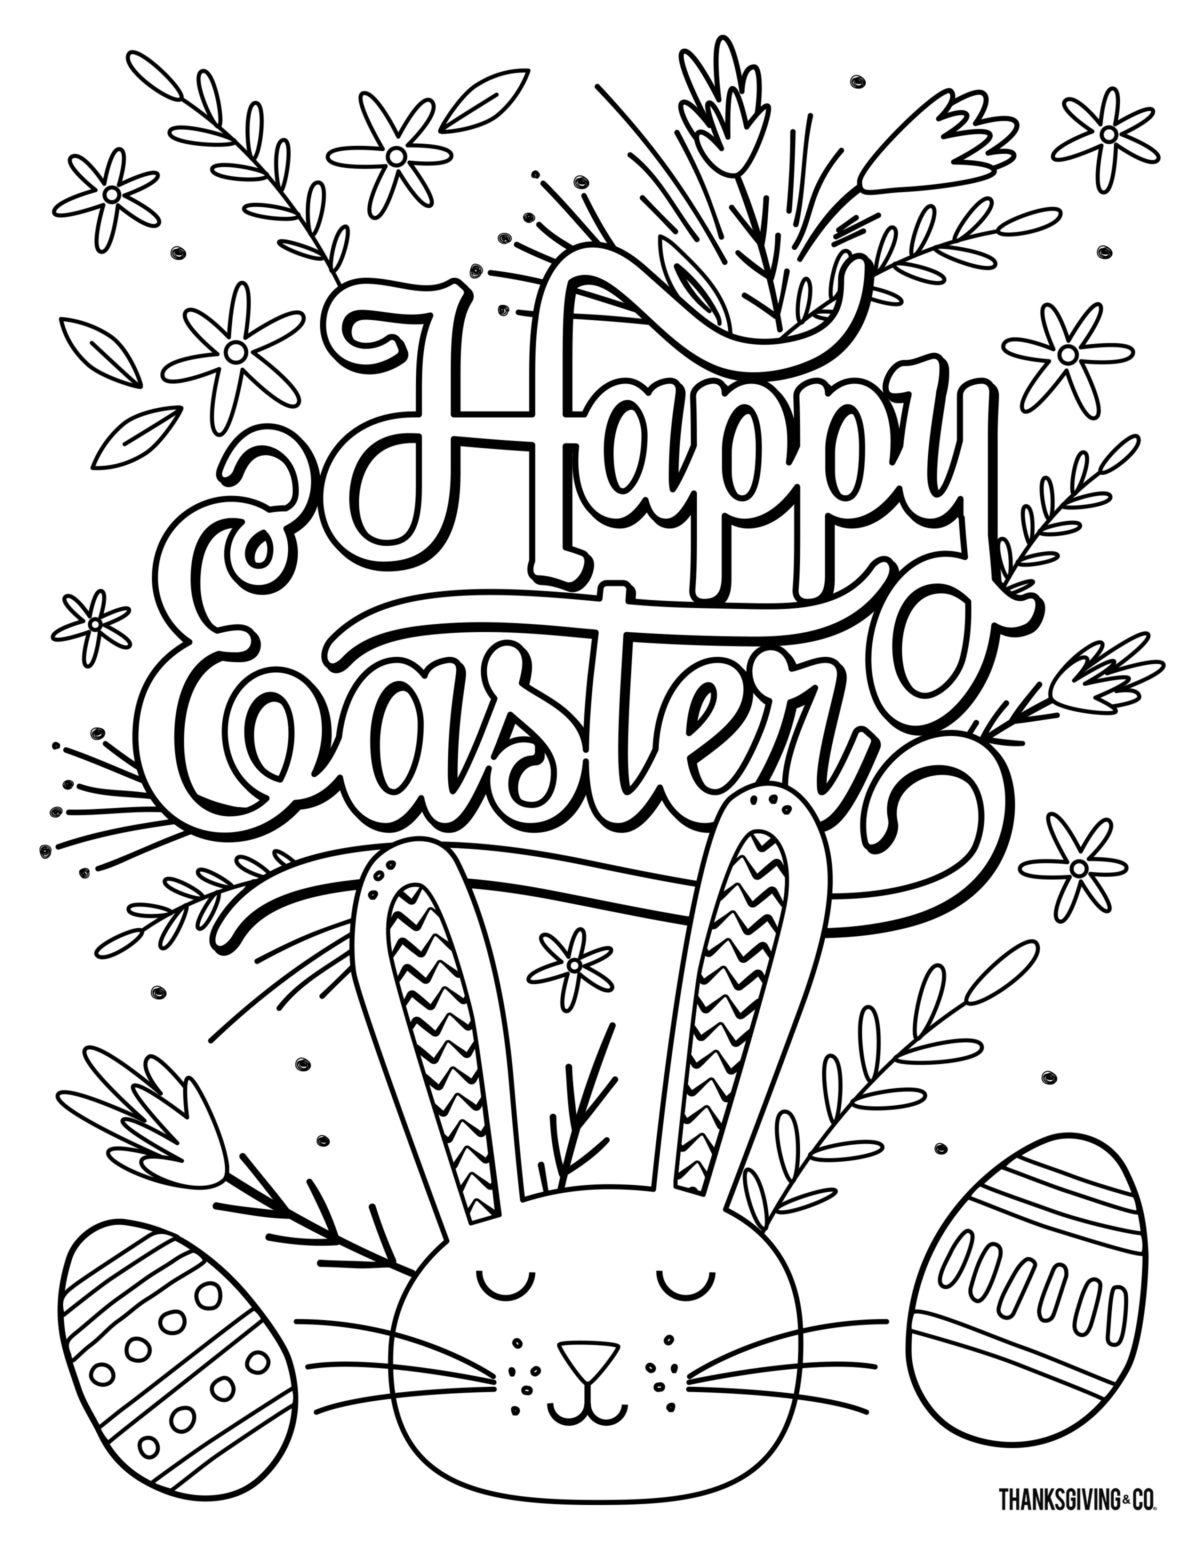 Coloring Pages For Adults Easter Coloring Ideas Astonishing Free Adult Easter Coloring Pages Photo